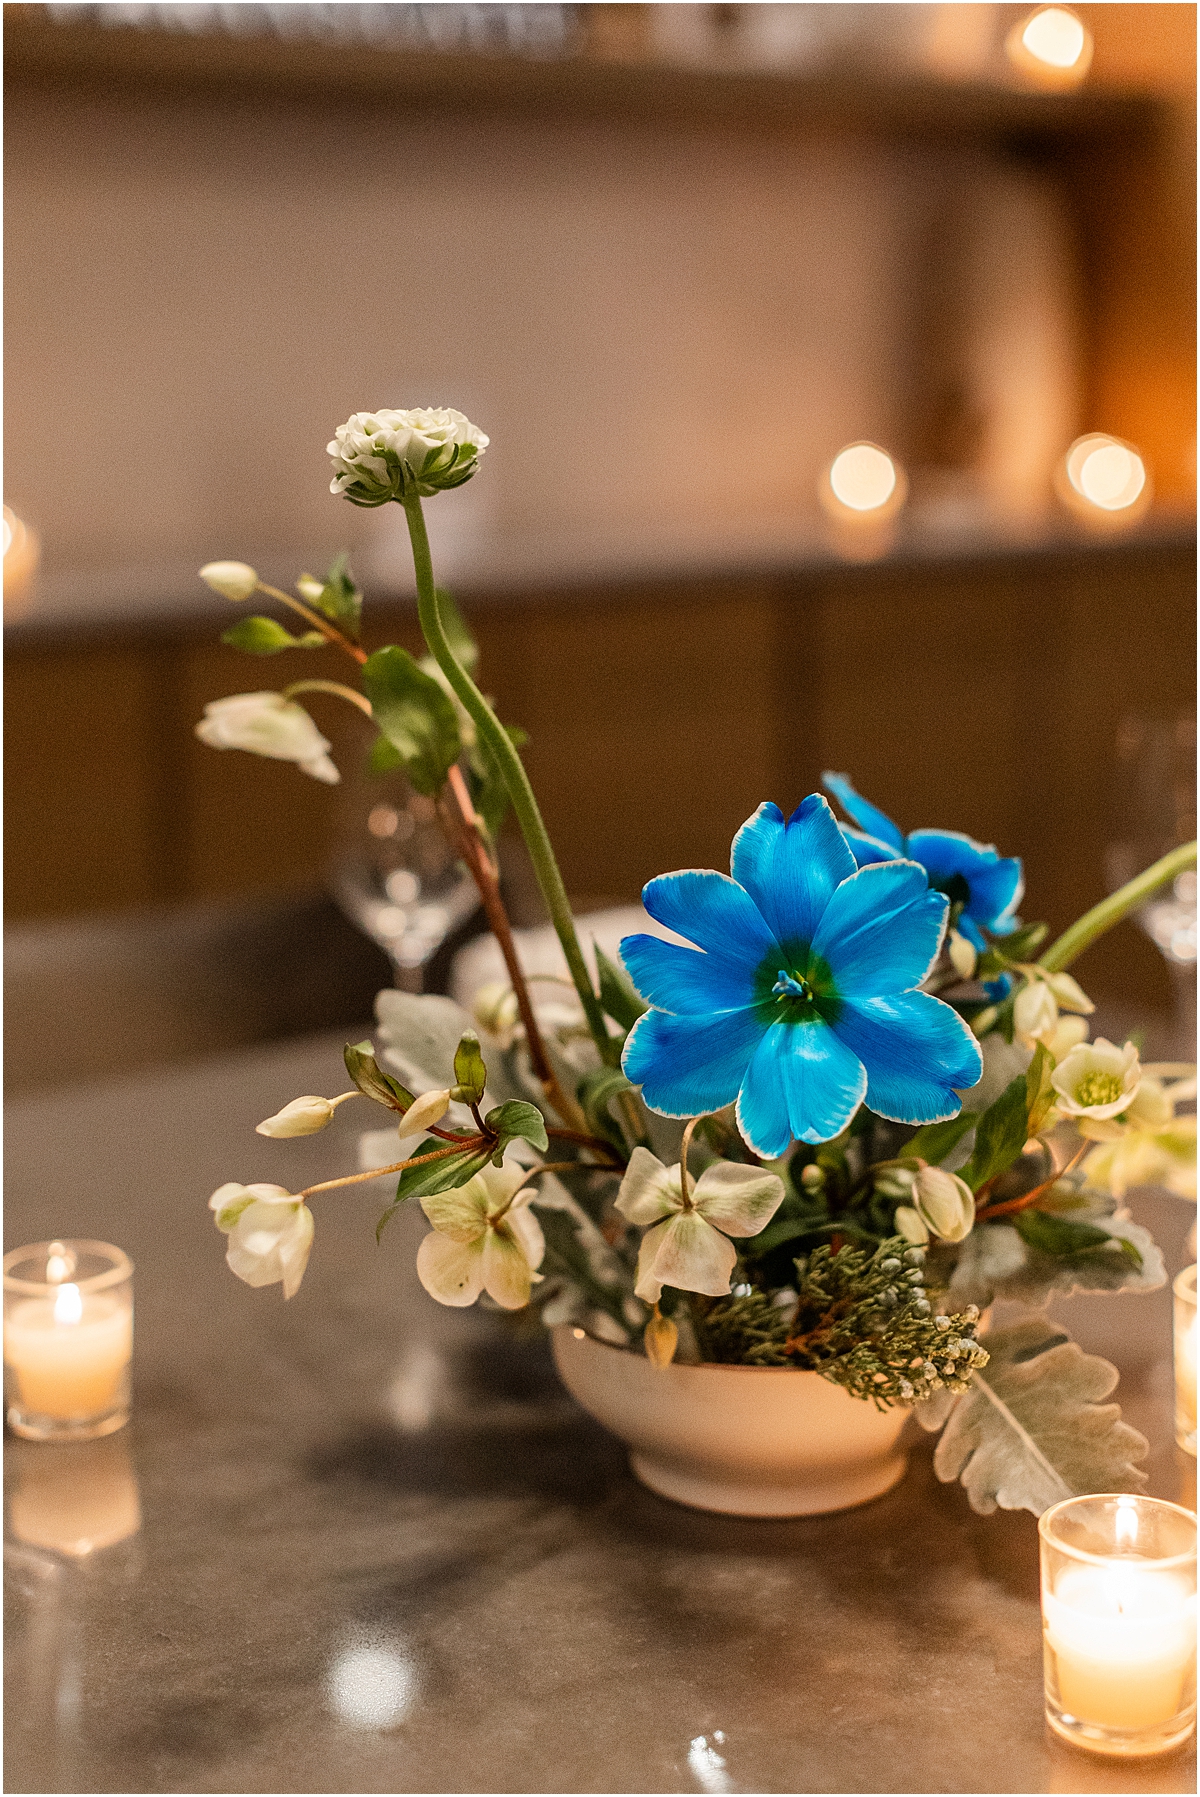 flower arrangements and candles decorate table